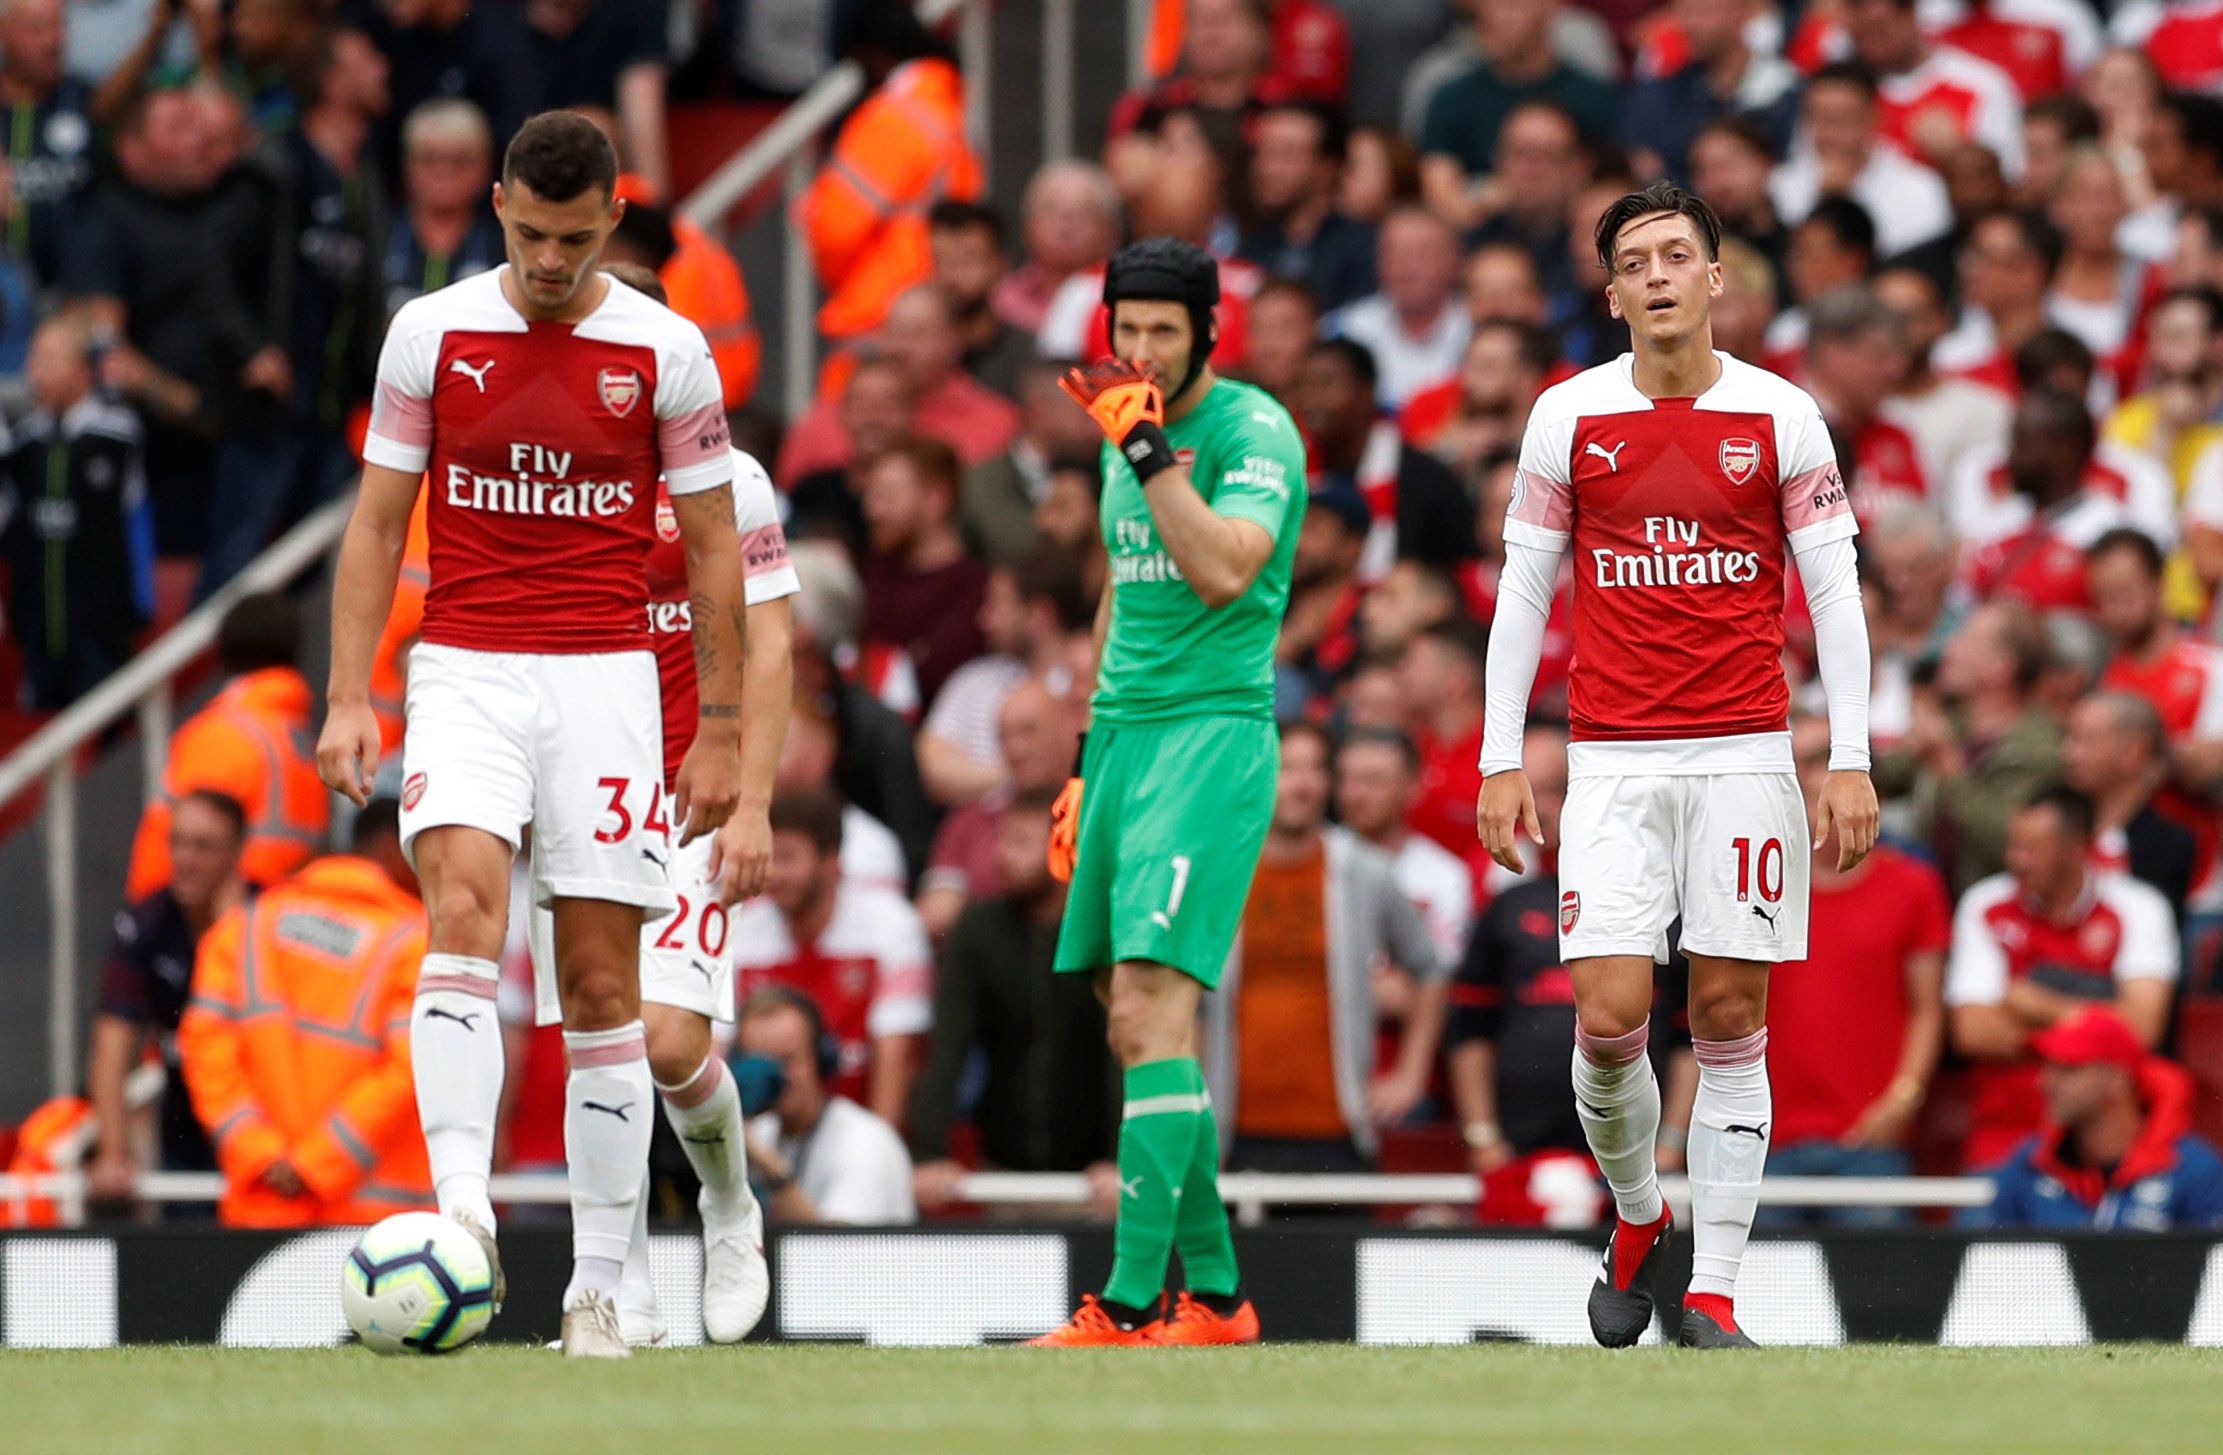 Soccer Football - Premier League - Arsenal v Manchester City - Emirates Stadium, London, Britain - August 12, 2018   Arsenal's Mesut Ozil, Petr Cech and Granit Xhaka look dejected after Manchester City scored their second goal   Action Images via Reuters/John Sibley    EDITORIAL USE ONLY. No use with unauthorized audio, video, data, fixture lists, club/league logos or 